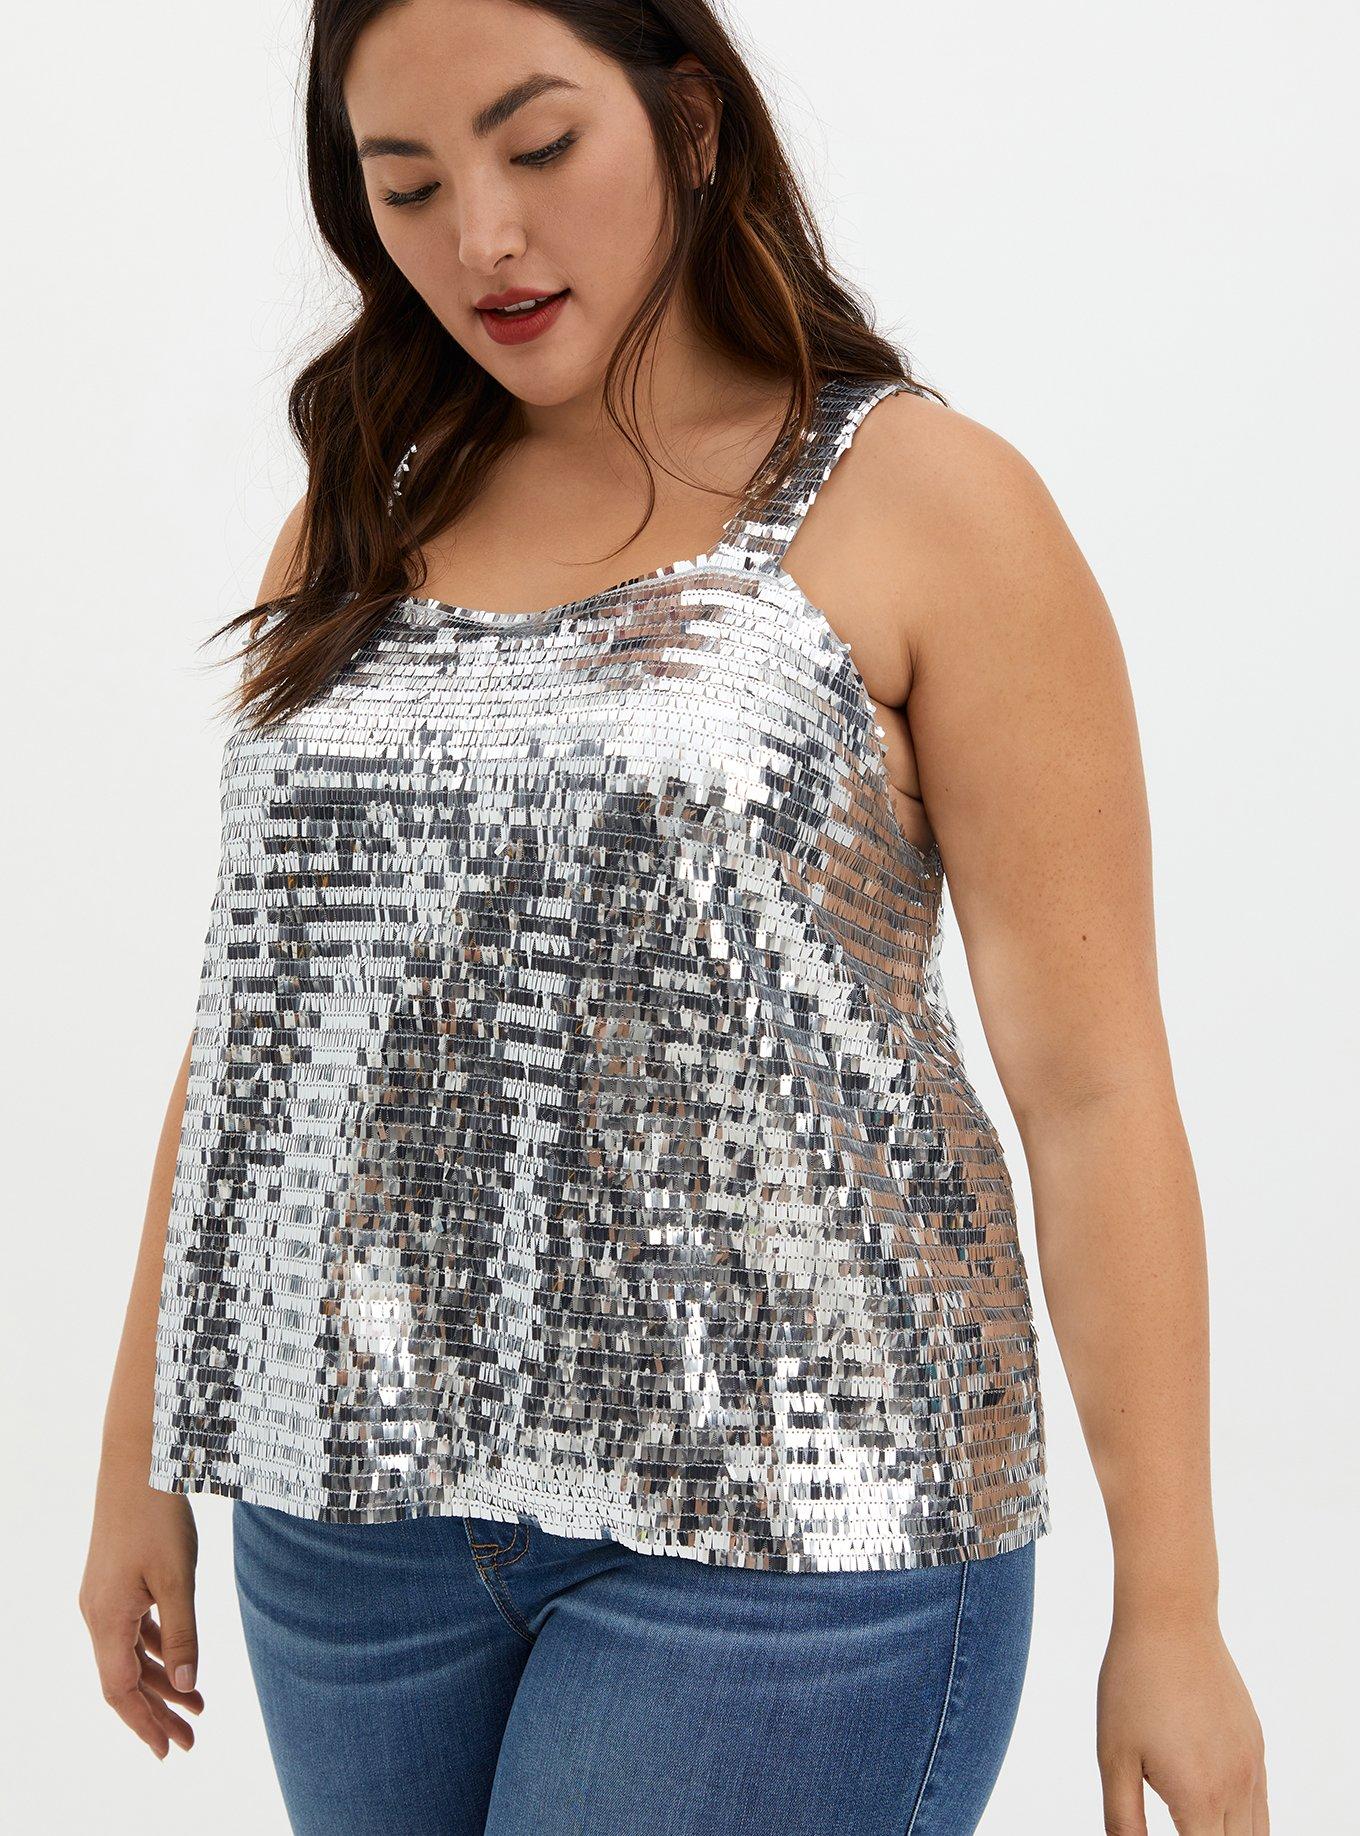 15 Plus Size Sparkly Tops  Womens evening tops, Sequence top outfit, Sparkly  top